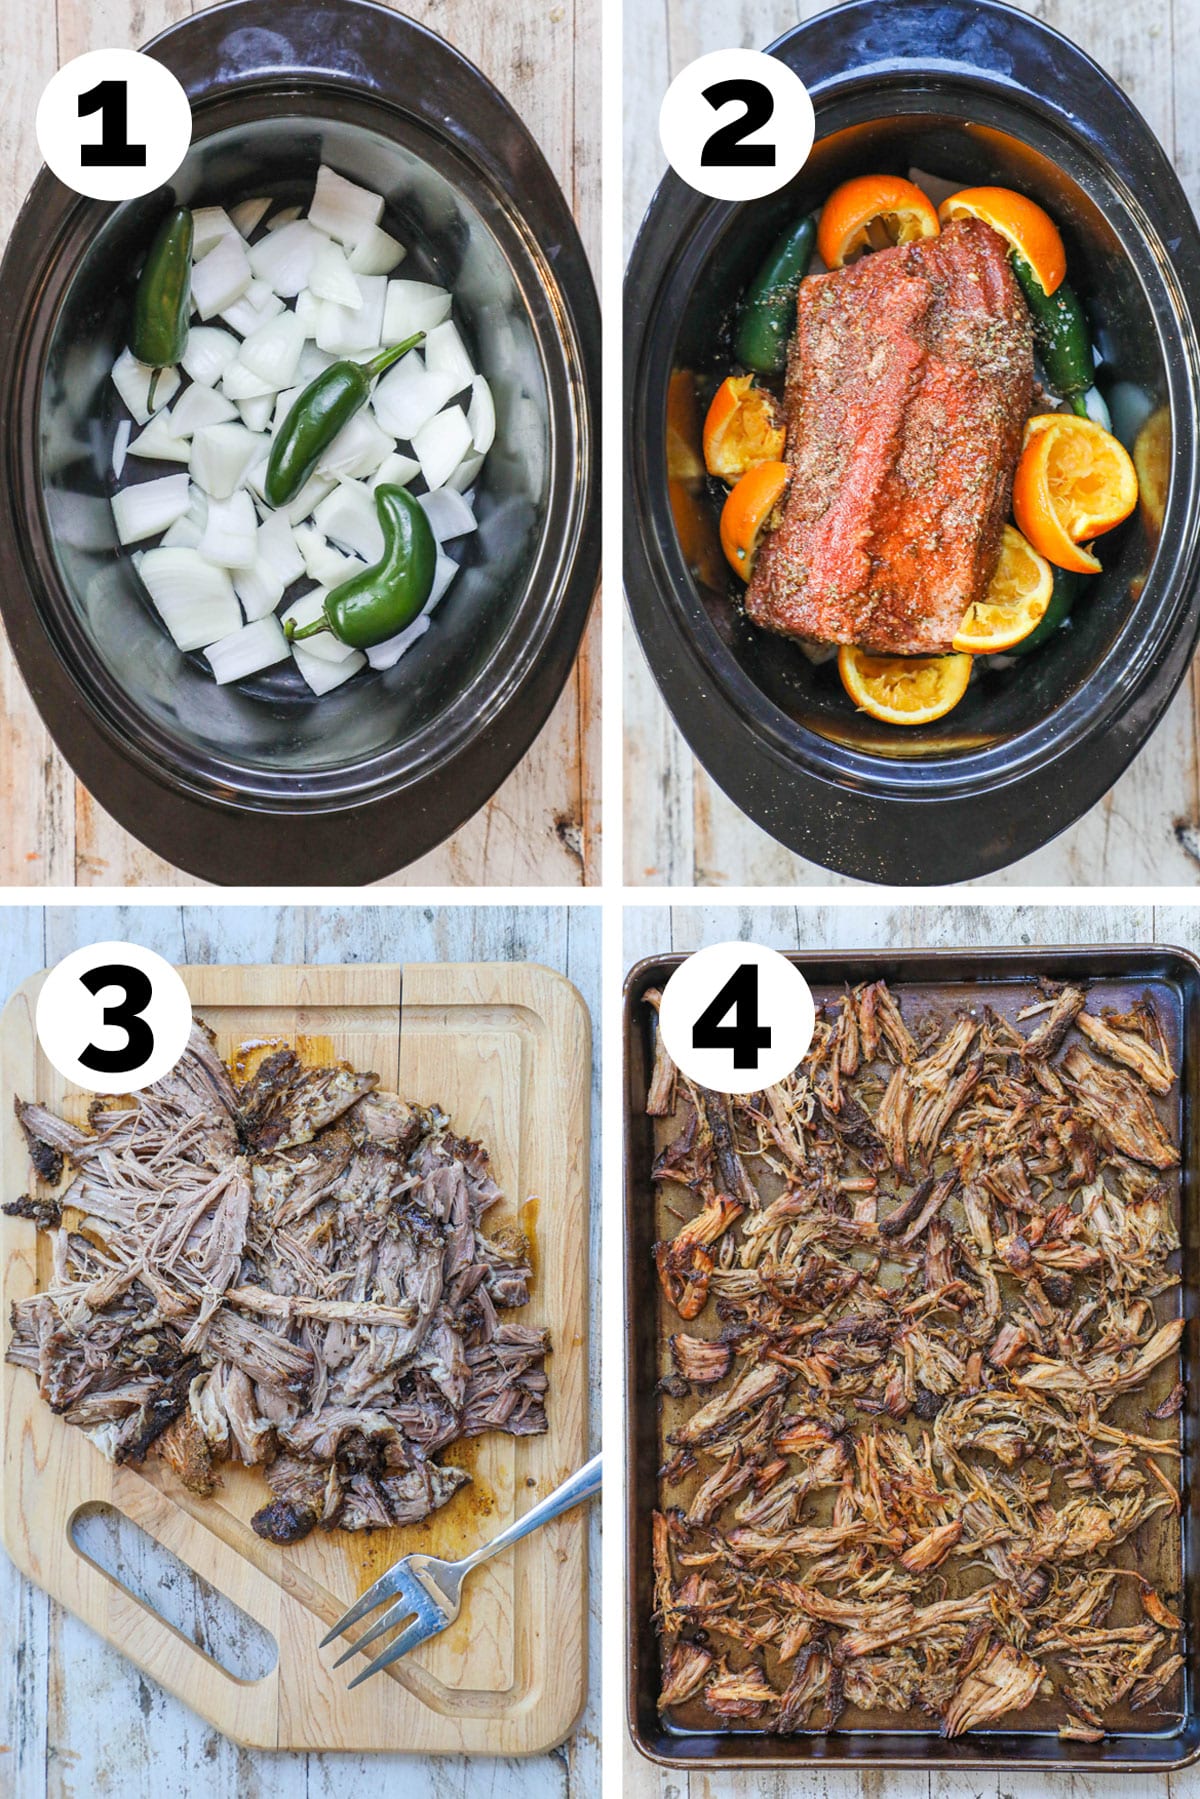 Process shots for how to make pork carnitas in the crockpot 1. Place onions and peppers in the slow cooker. 2. Add pork shoulder, oranges, jalapeno and spice mix. 3. Bake and shred. 4. Place shredded carnitas on baking sheet and broil until crispy.